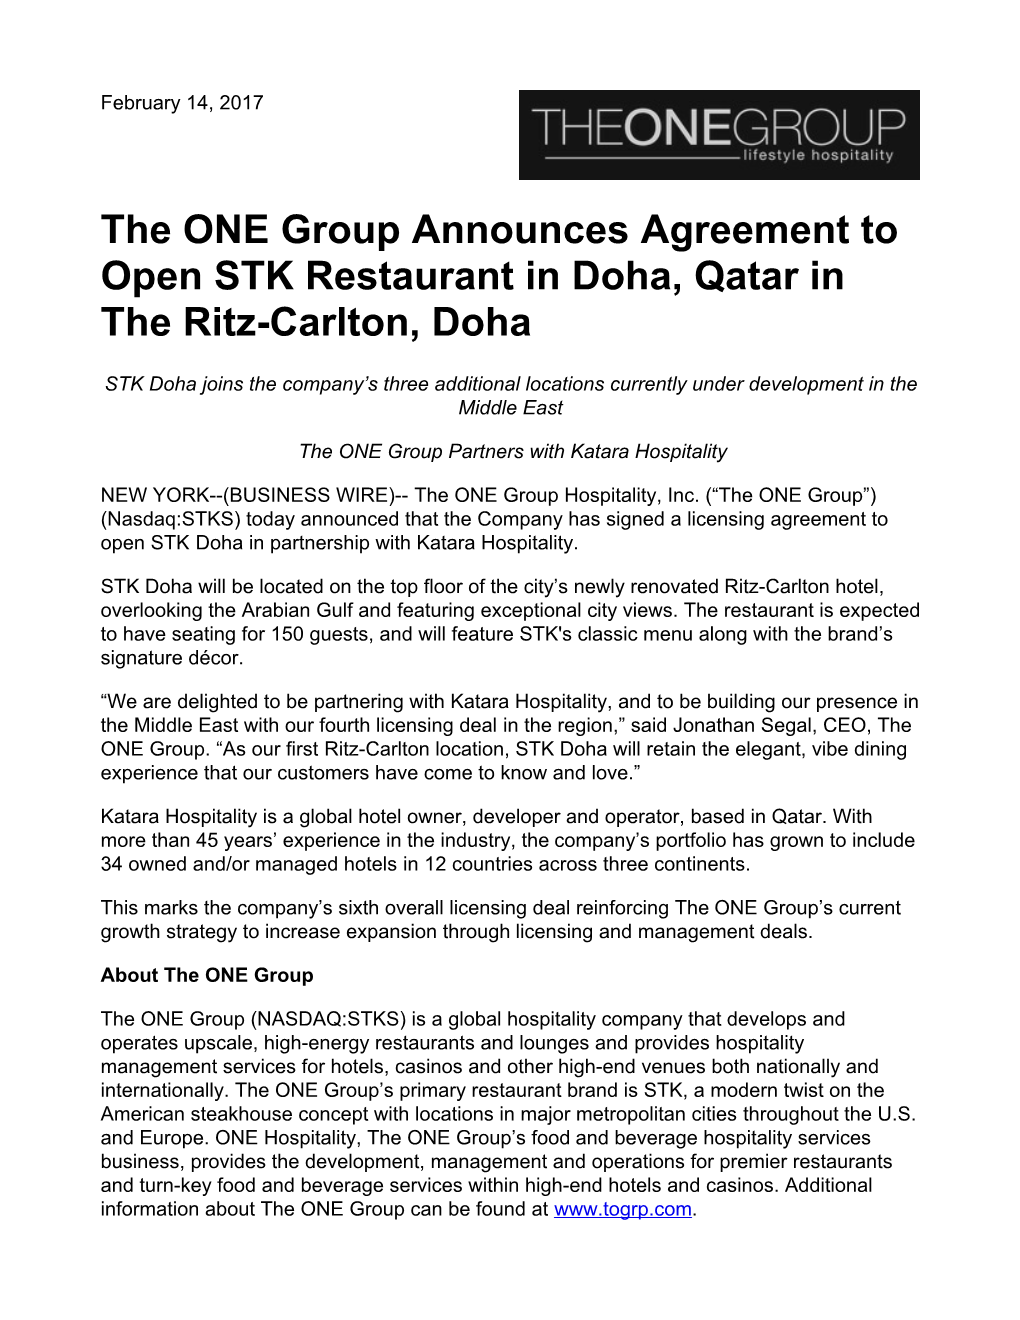 The ONE Group Announces Agreement to Open STK Restaurant in Doha, Qatar in the Ritz-Carlton, Doha